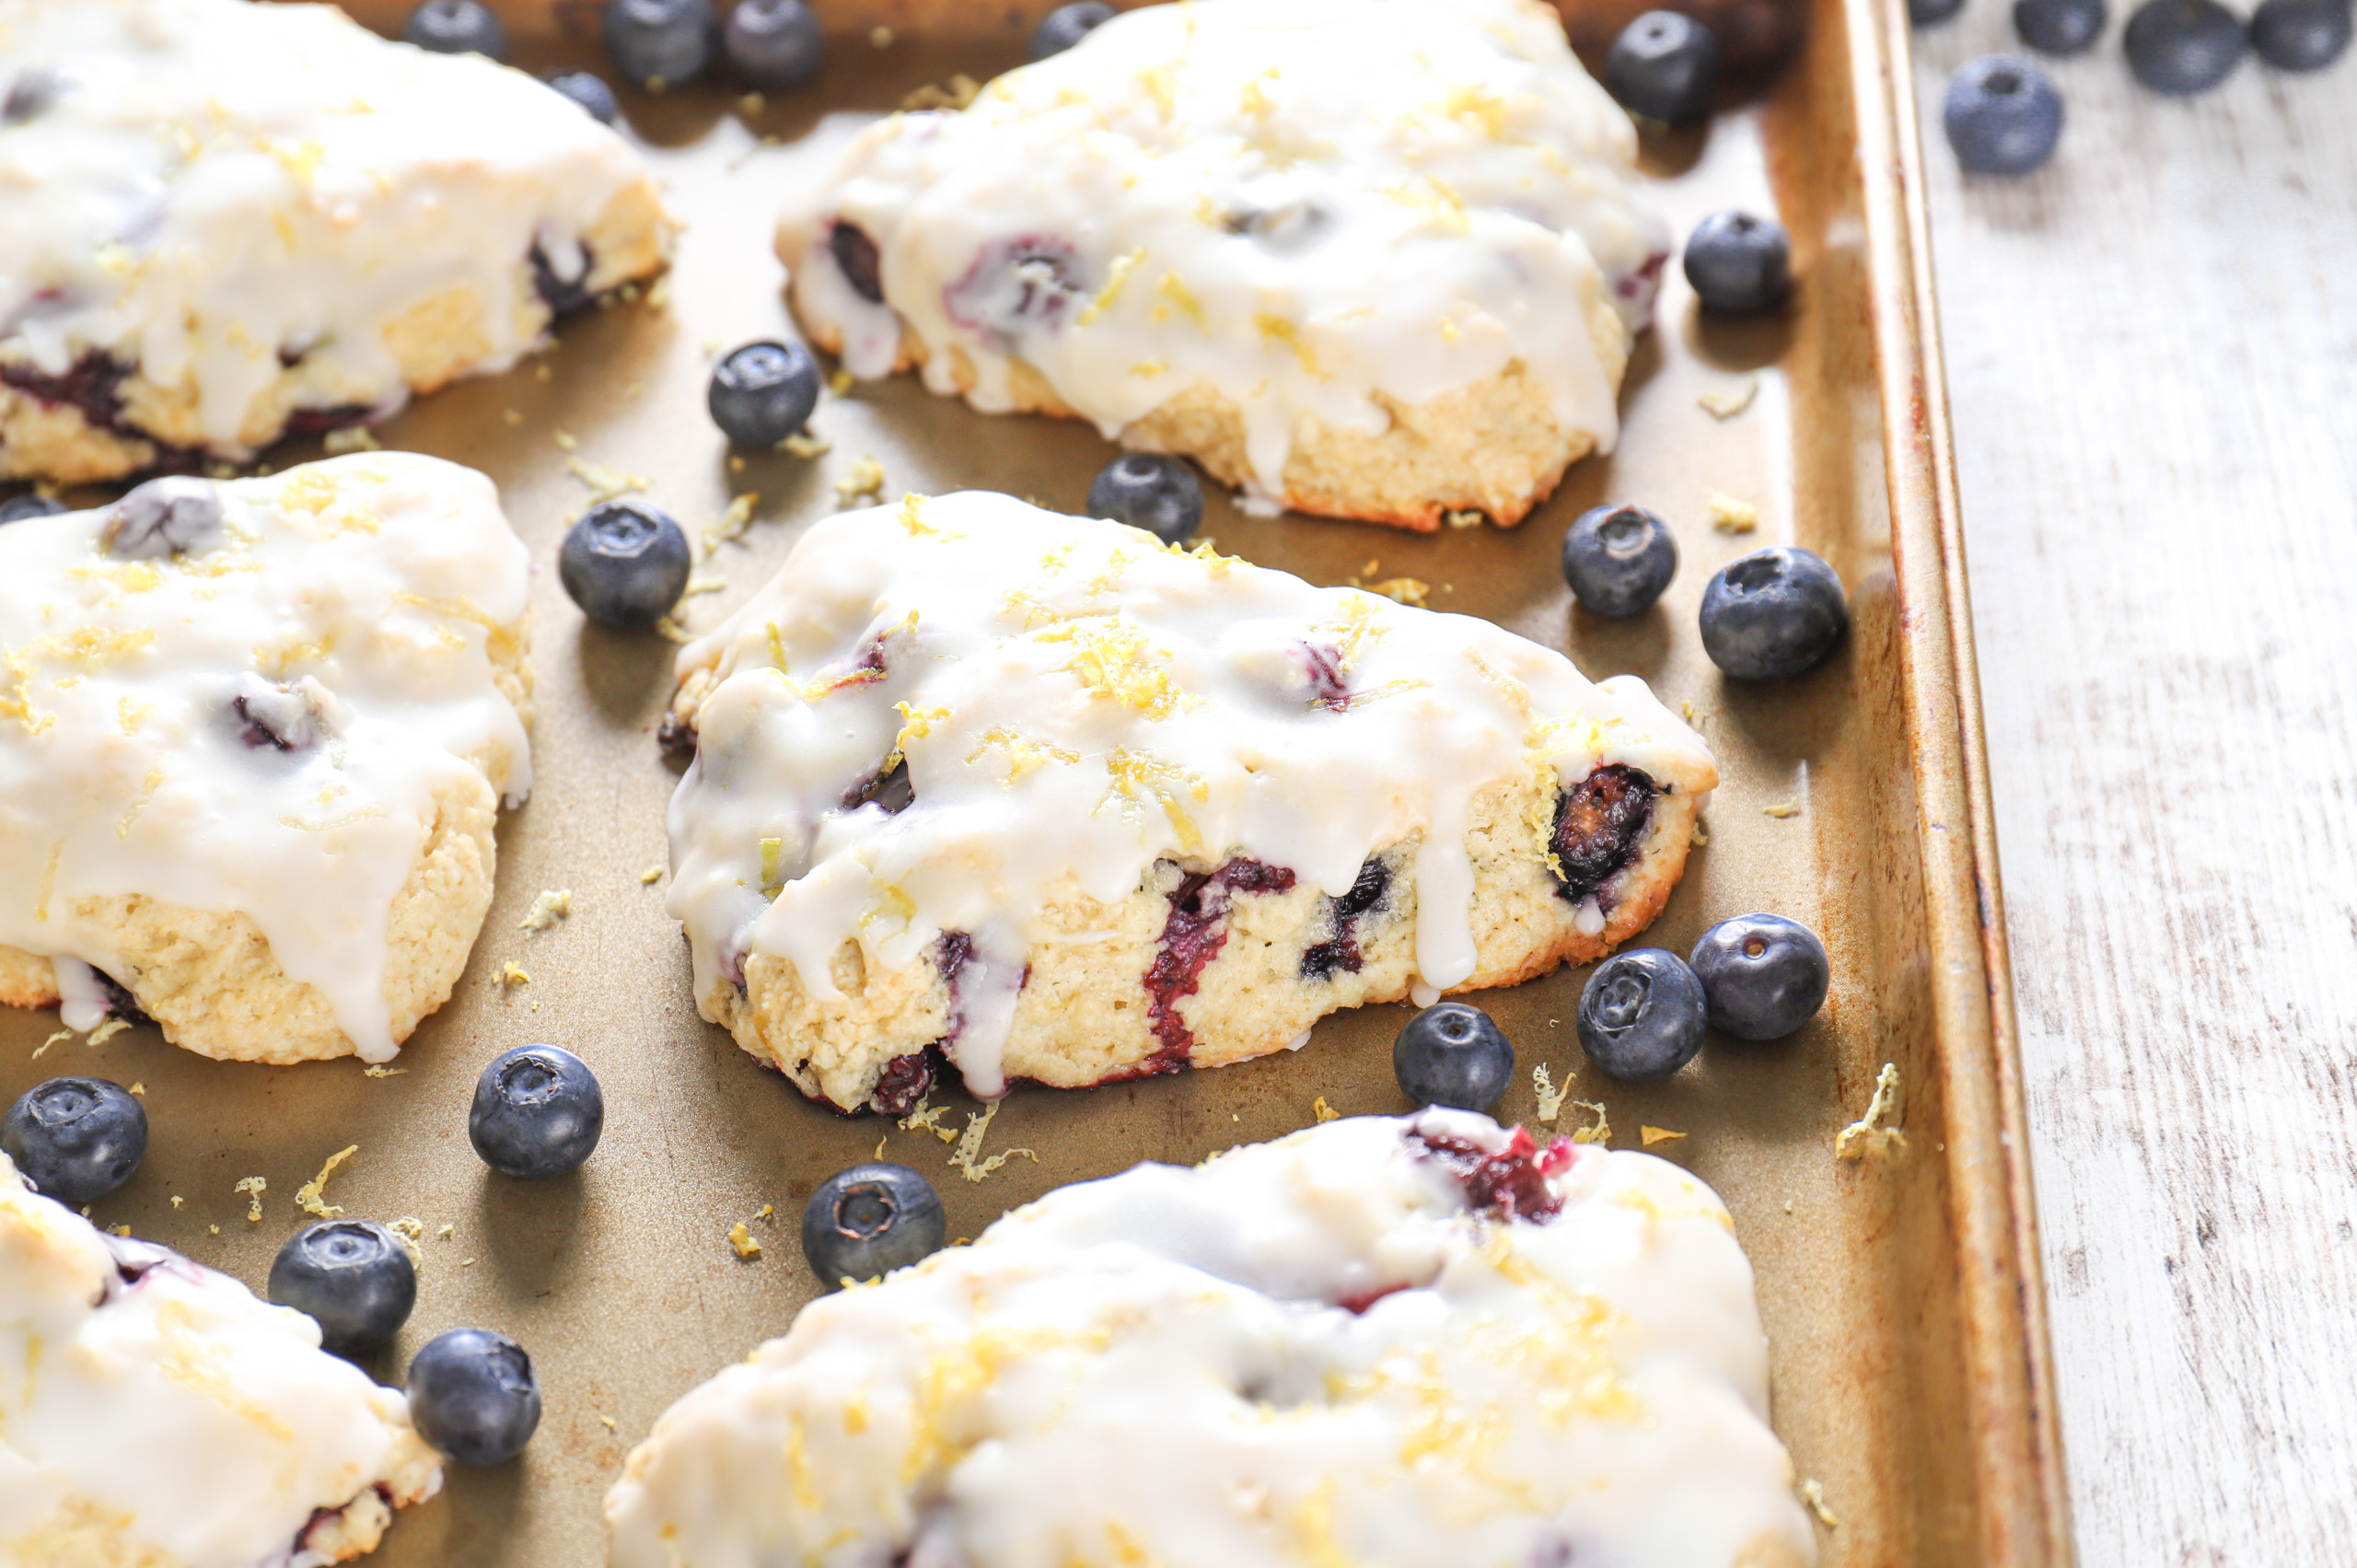 Side view of a lemon blueberry scone on an aluminum baking sheet surrounded by other scones.